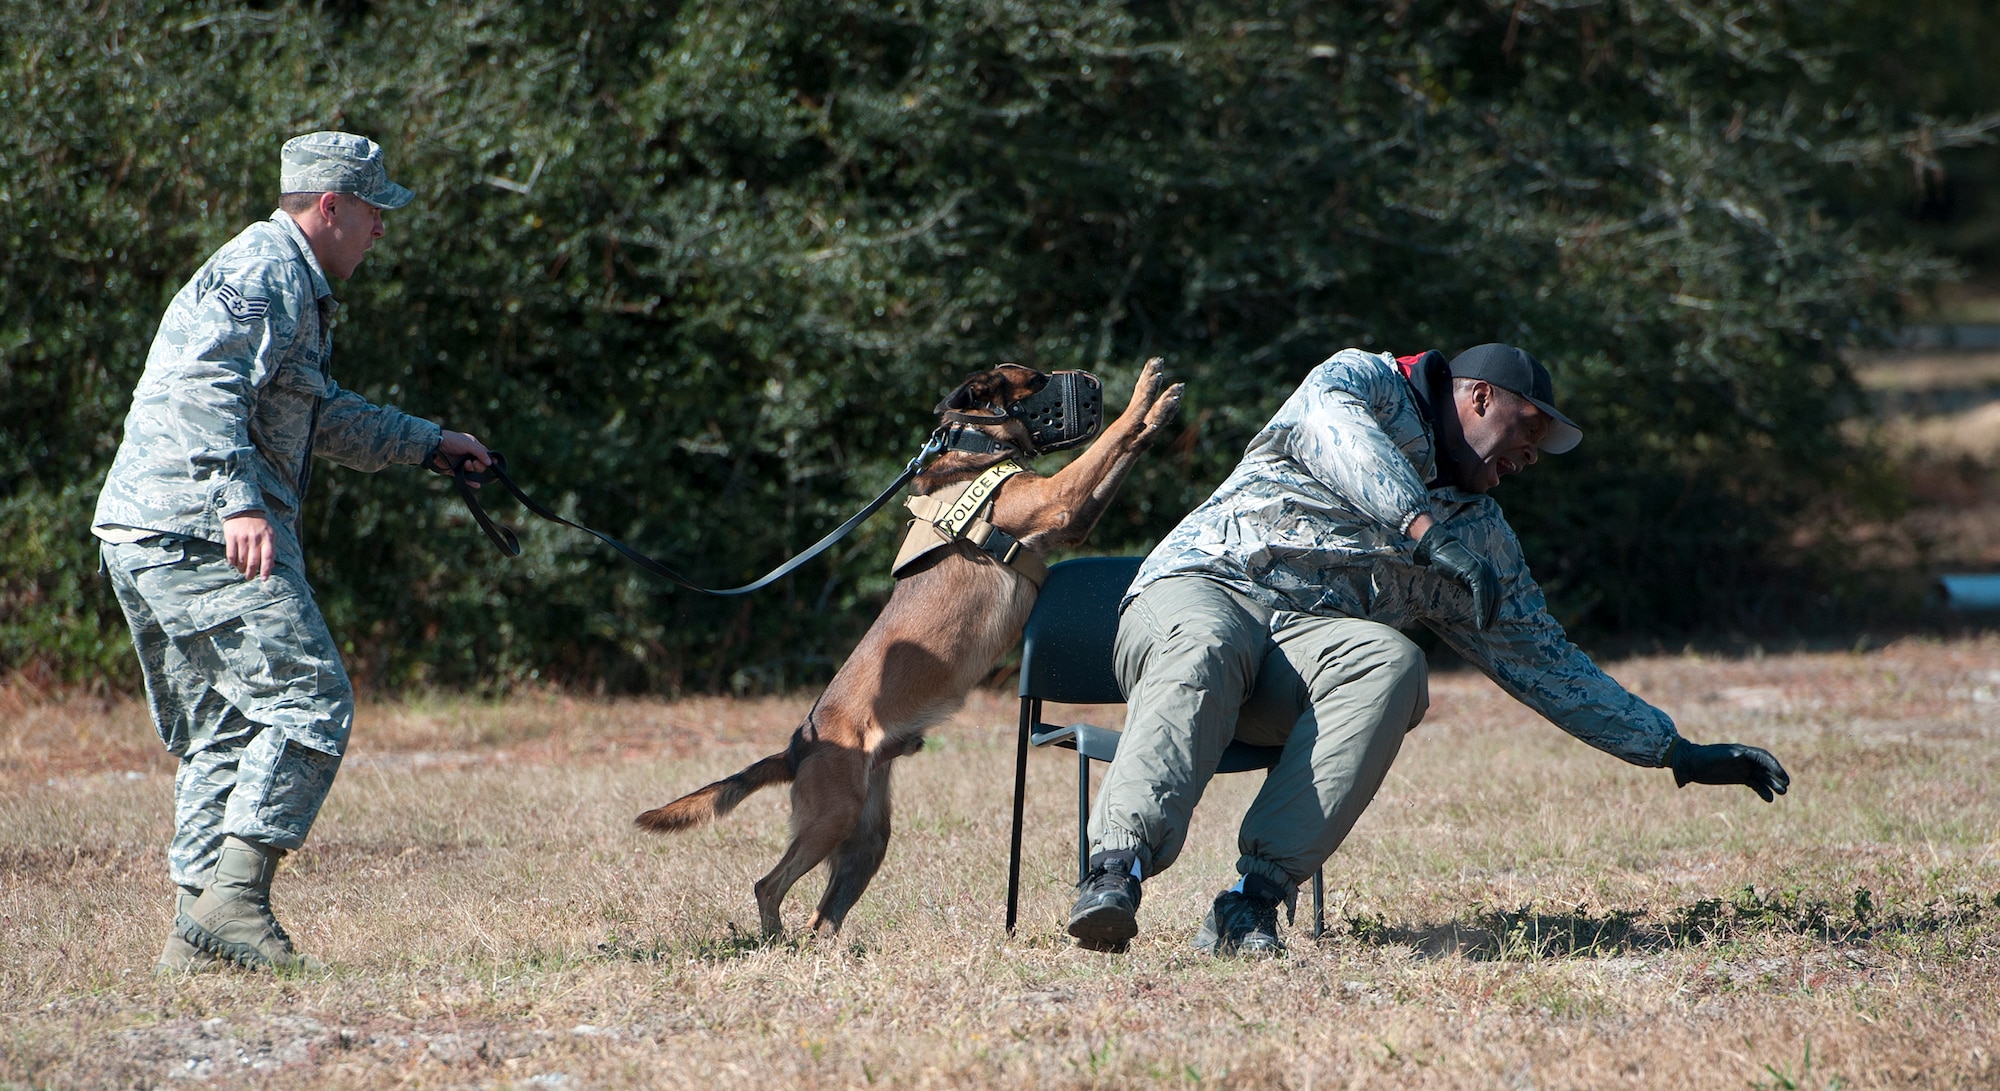 Staff Sgt. Shane Masse, 96th Security Forces Squadron military working dog handler, and his partner, Pako, take down an uncompliant suspect during the Emerald Coast K-9 Clash at Hurlburt Field, Fla., Nov. 15, 2014. Competitors participated in variety of events during the clash, which included searching buildings, navigating a jungle obstacle course and patrolling scenarios. (U.S. Air Force photo/Senior Airman Kentavist P. Brackin)